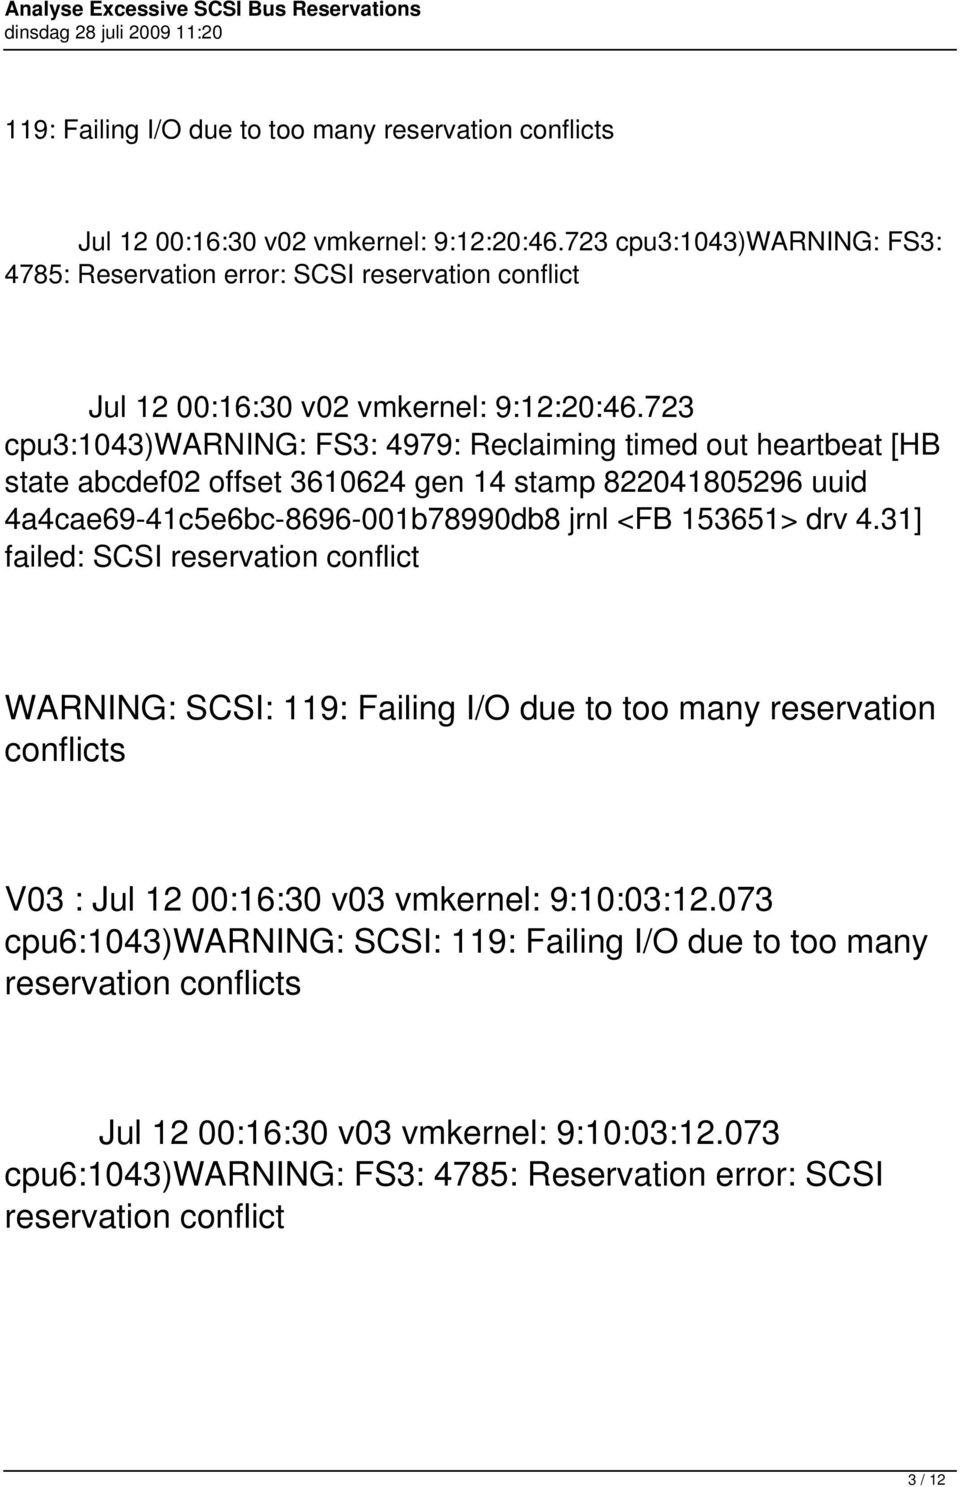 723 cpu3:1043)warning: FS3: 4979: Reclaiming timed out heartbeat [HB state abcdef02 offset 3610624 gen 14 stamp 822041805296 uuid 4a4cae69-41c5e6bc-8696-001b78990db8 jrnl <FB 153651> drv 4.